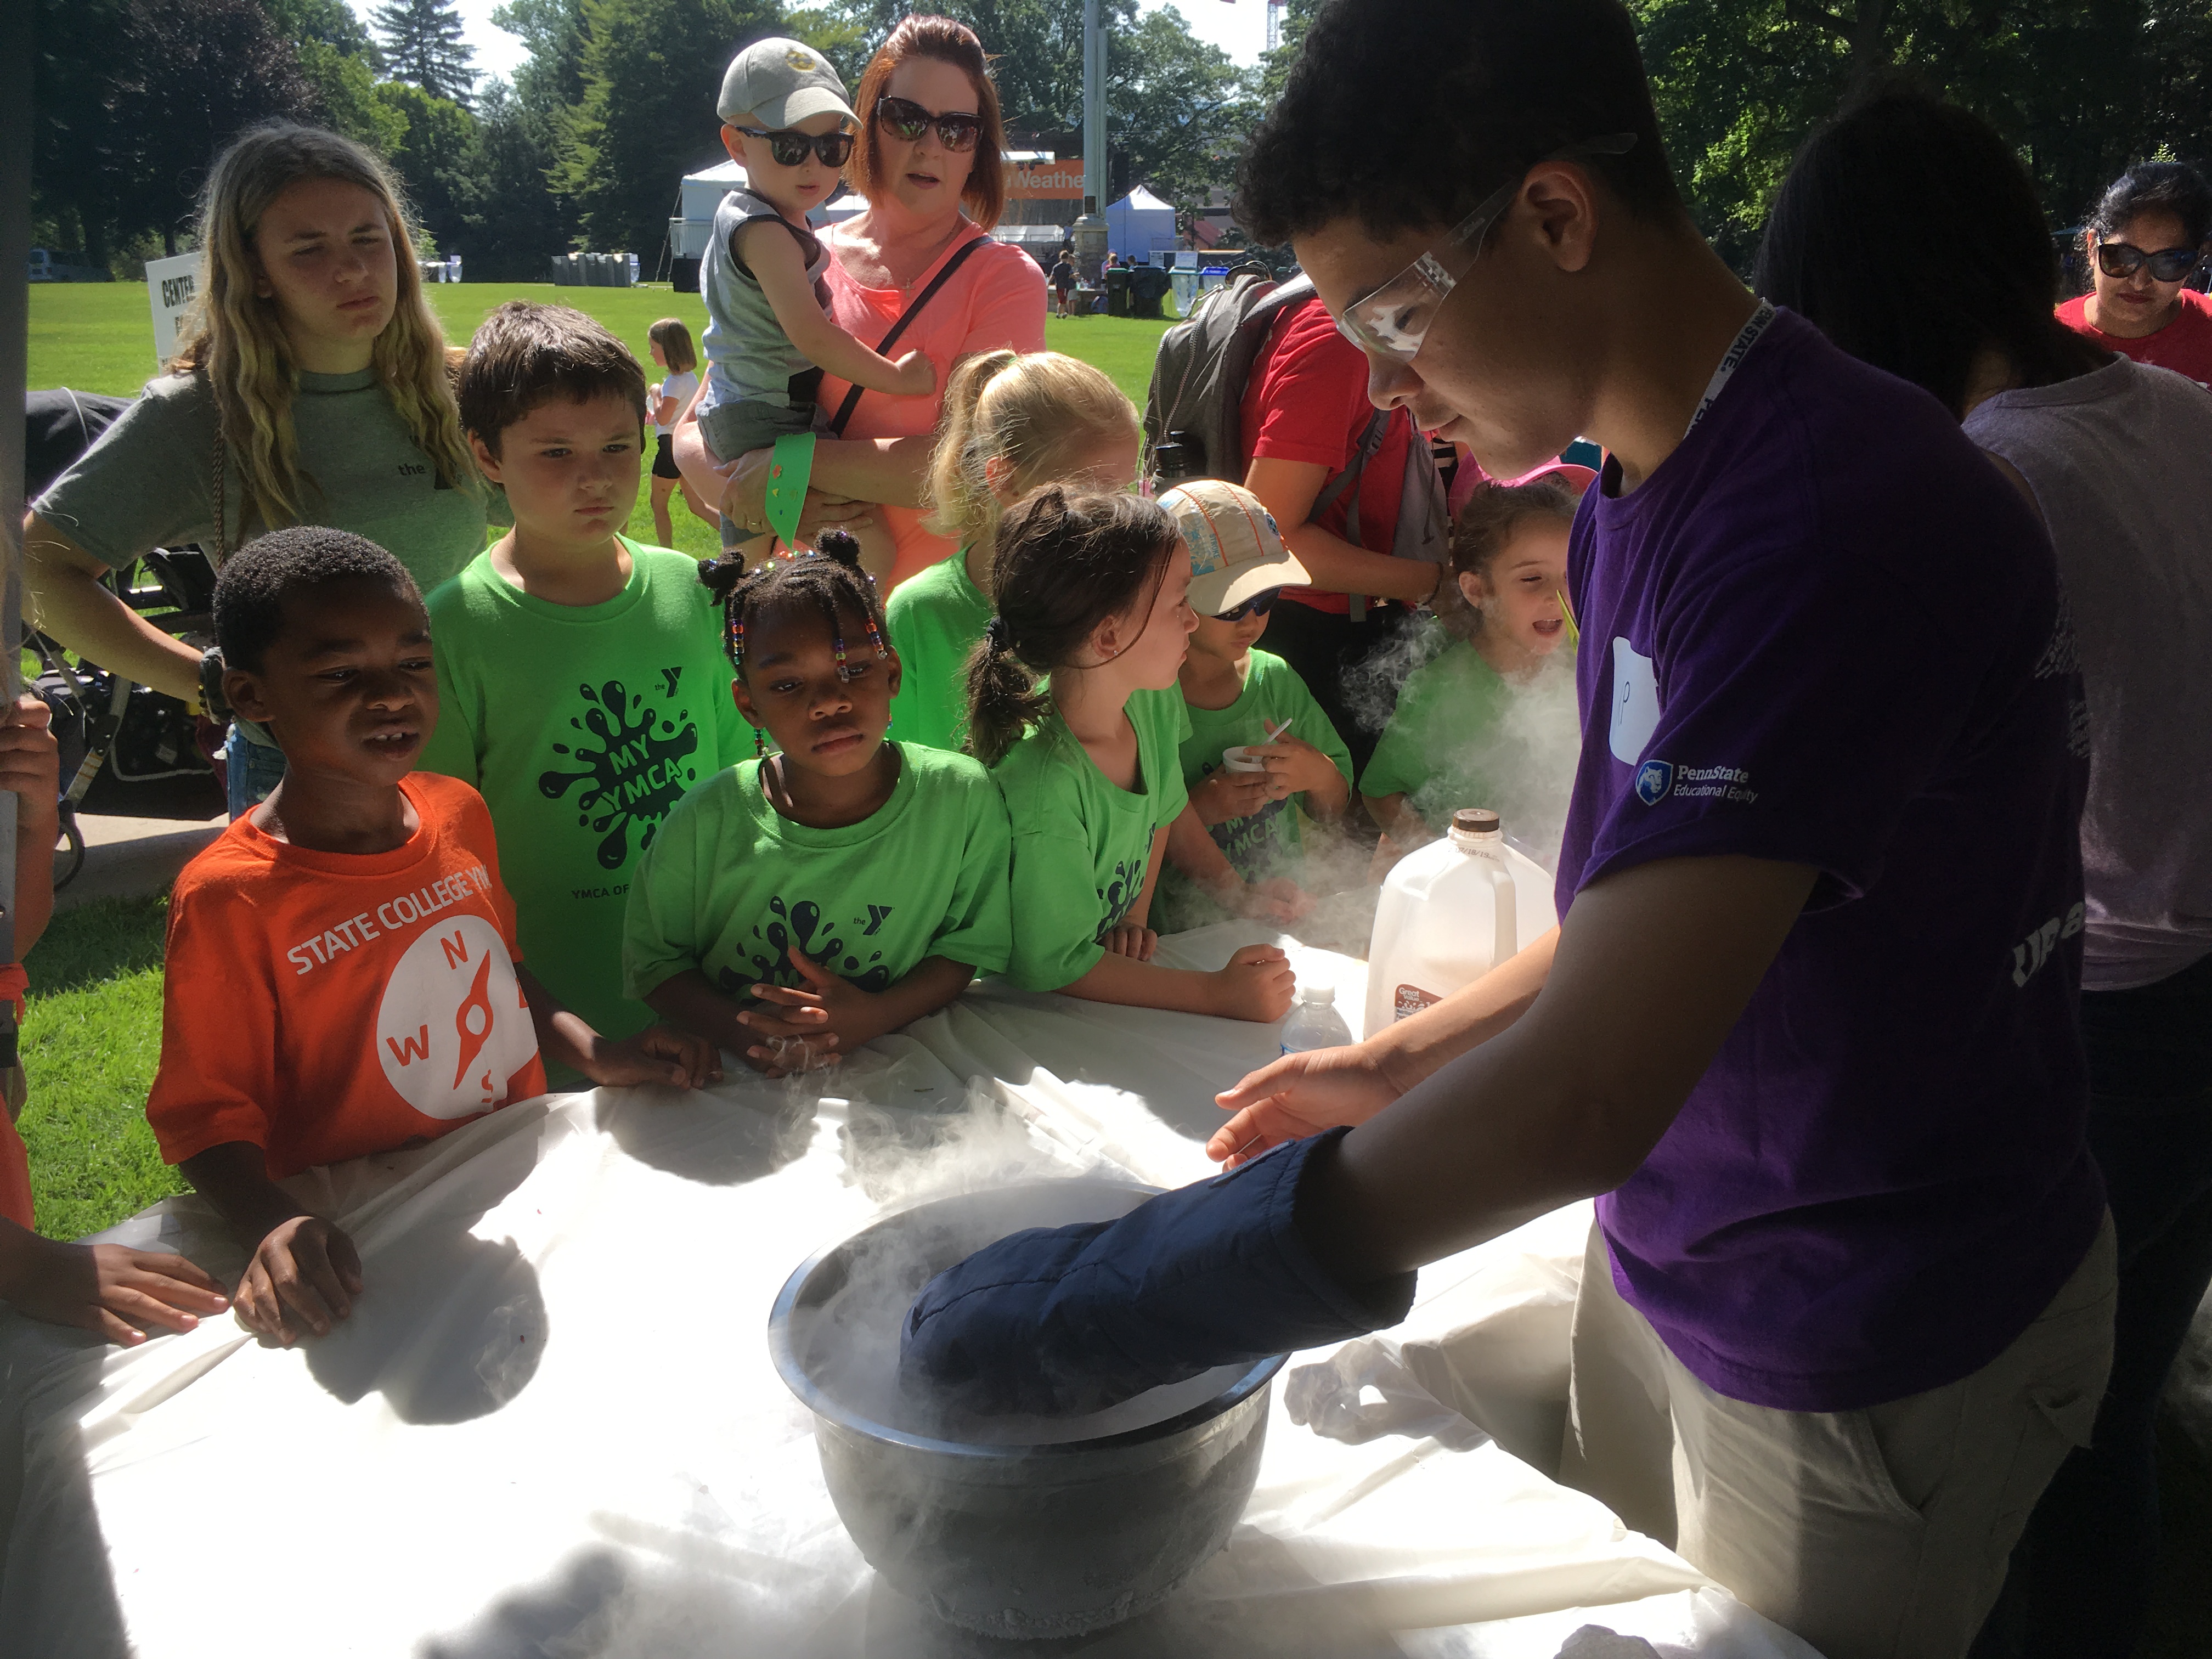 Children gather around a scientific demonstration on a table outdoors.